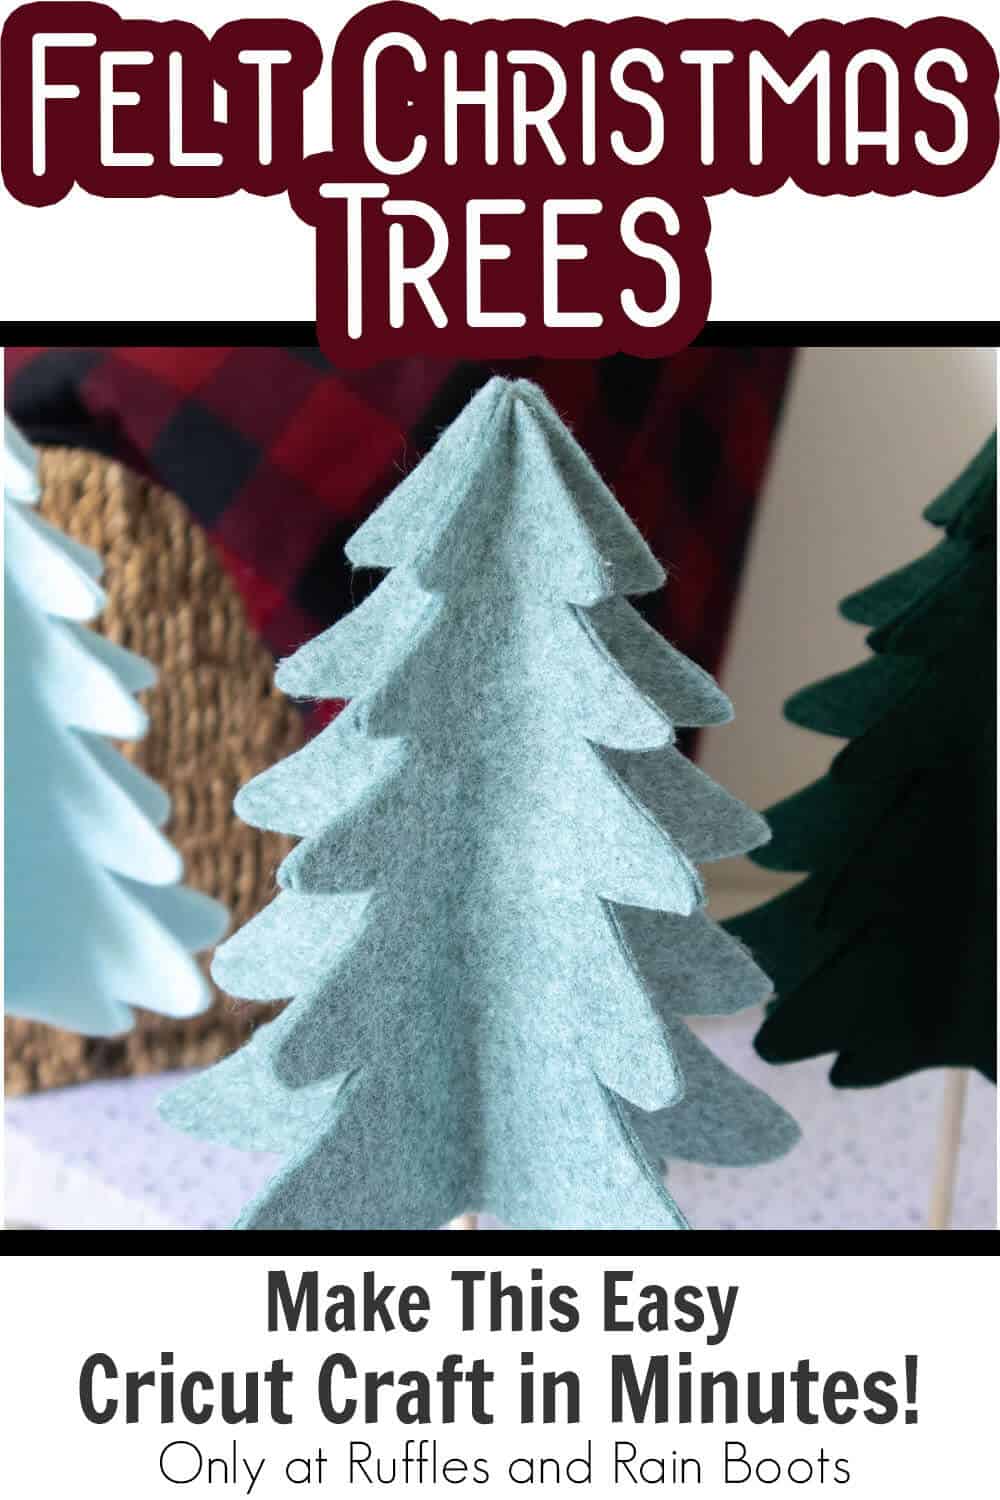 diy scandinavian christmas trees felt with text which reads felt christmas tres make this easy cricut craft in minutes!